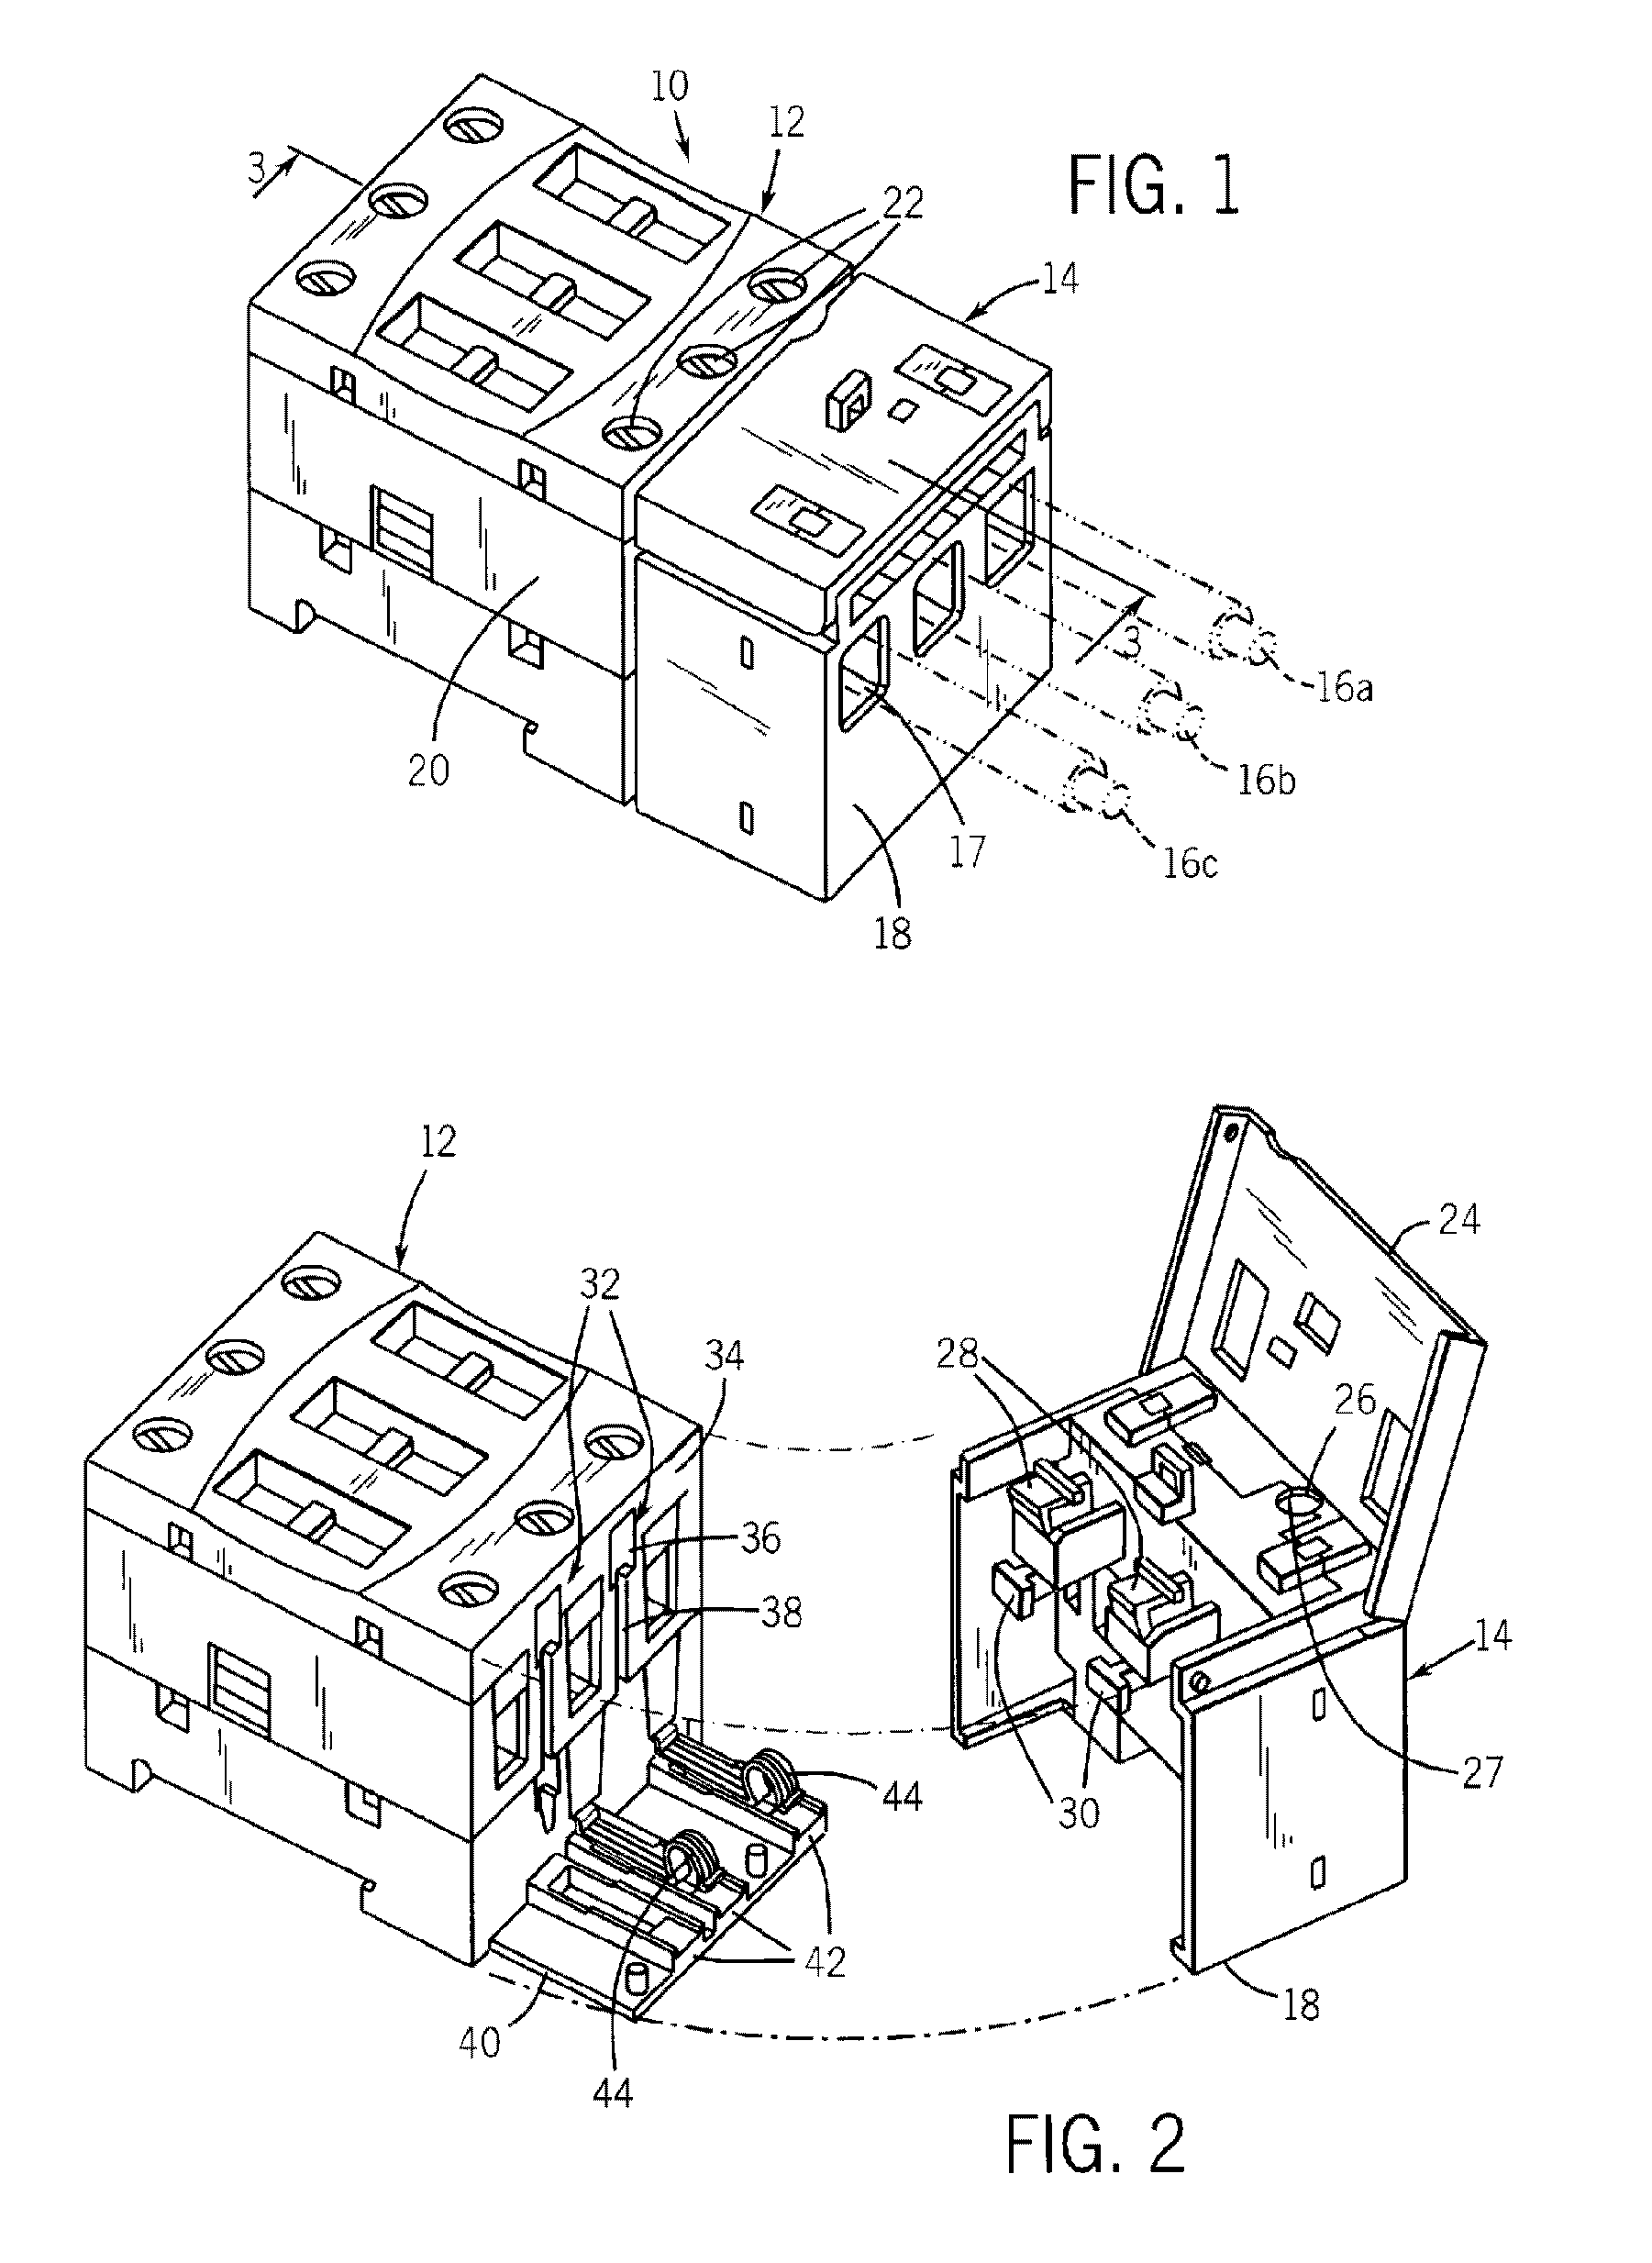 Method and apparatus for monitoring wellness of contactors and starters